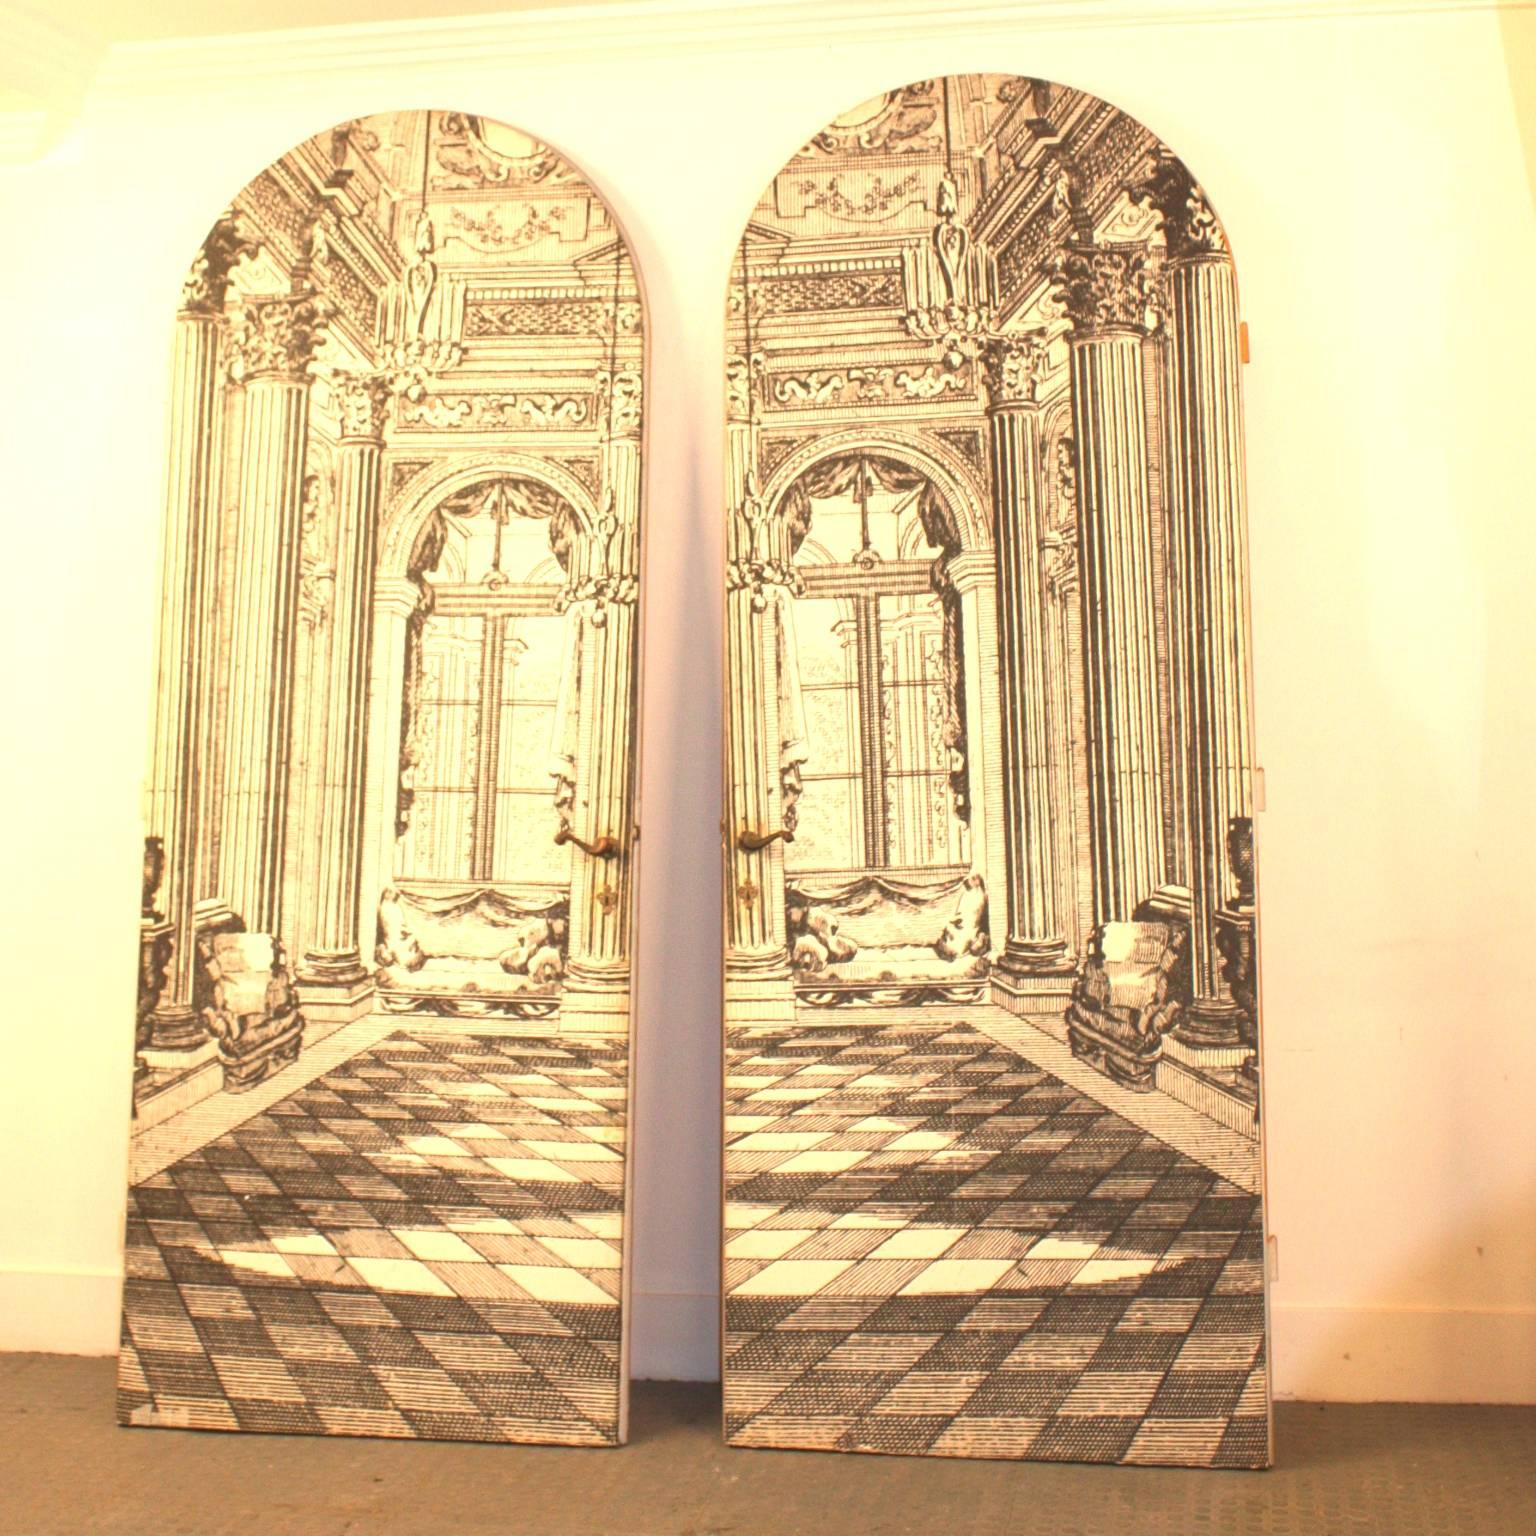 A pair of beautiful large doors with a printed scenery of grand room, back of the doors in plain creamy color, in style Piero Fornasetti, 1950s, Italian.